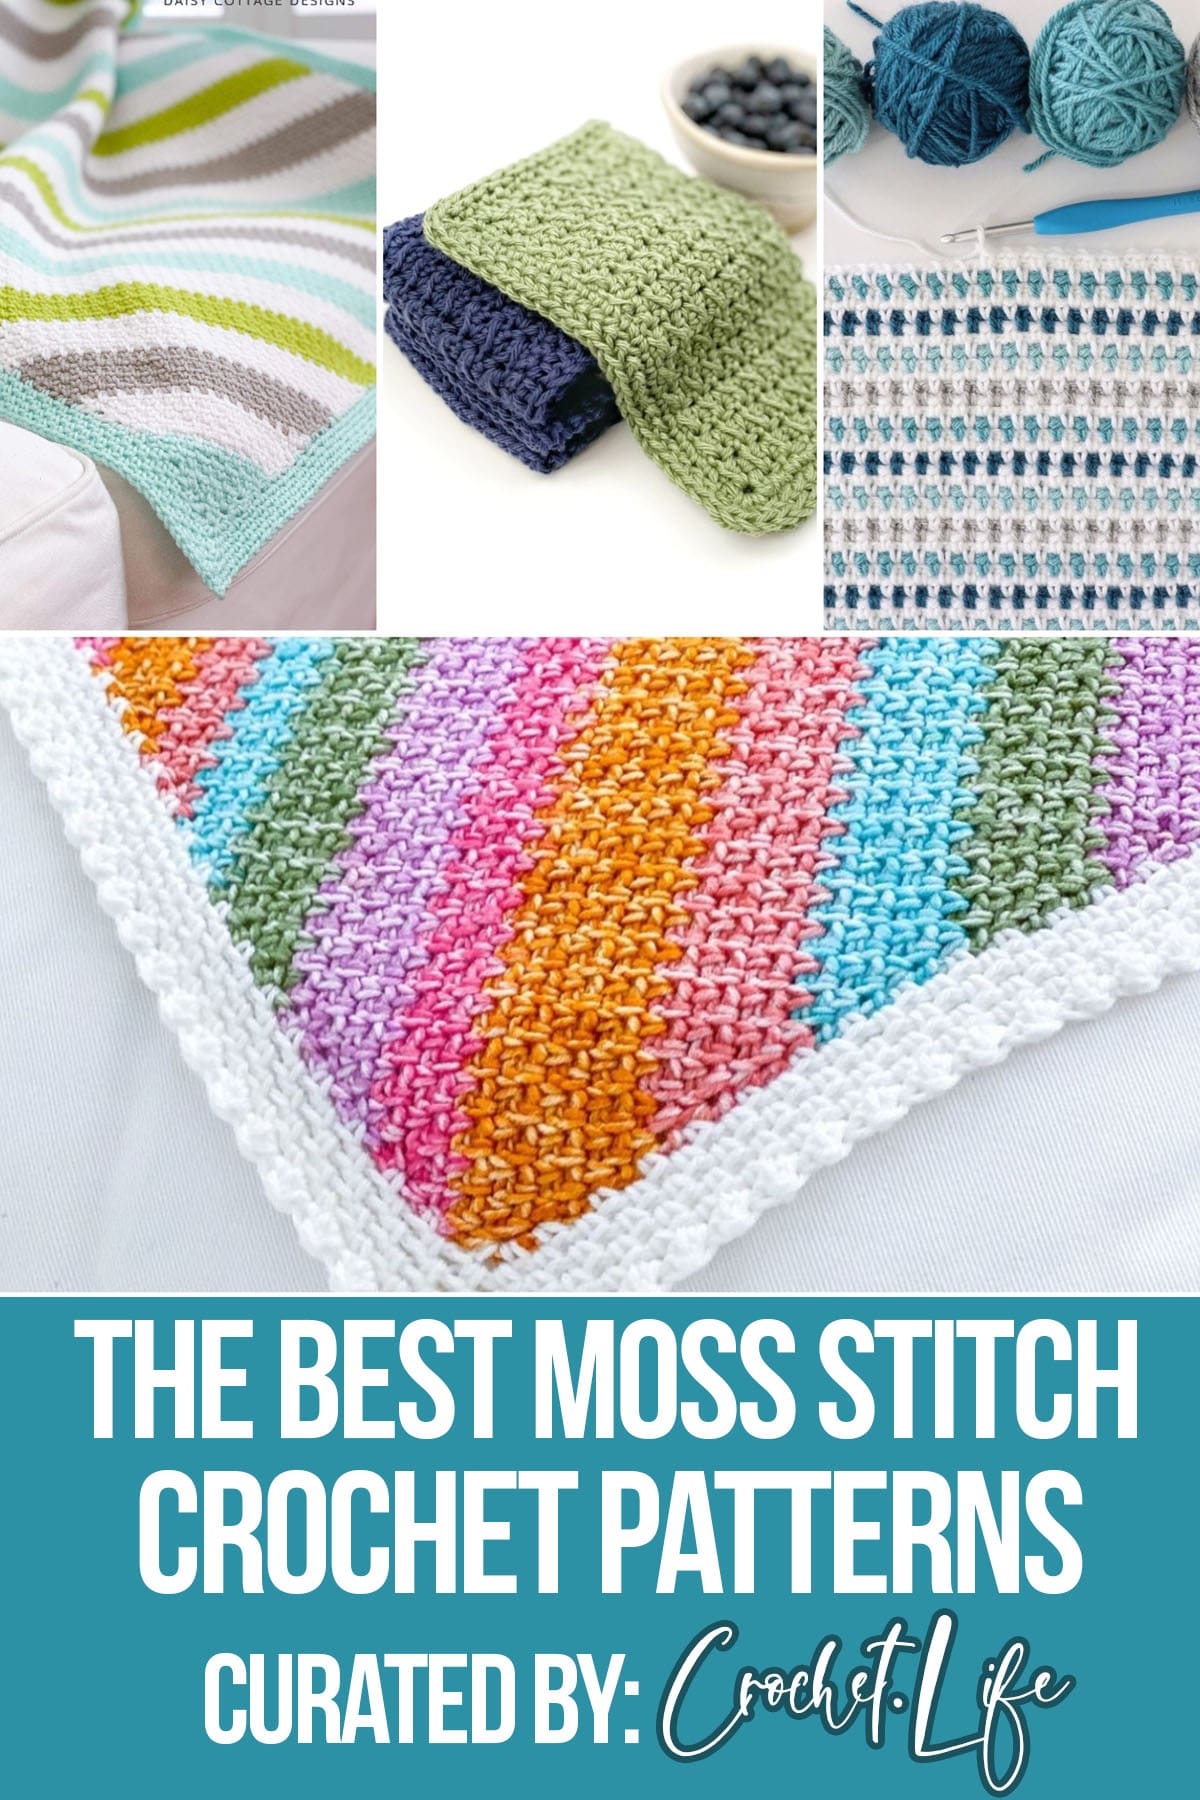 photo collage of crochet patterns using moss stitch with text which reads the best moss stitch crochet patterns curated by crochet.life